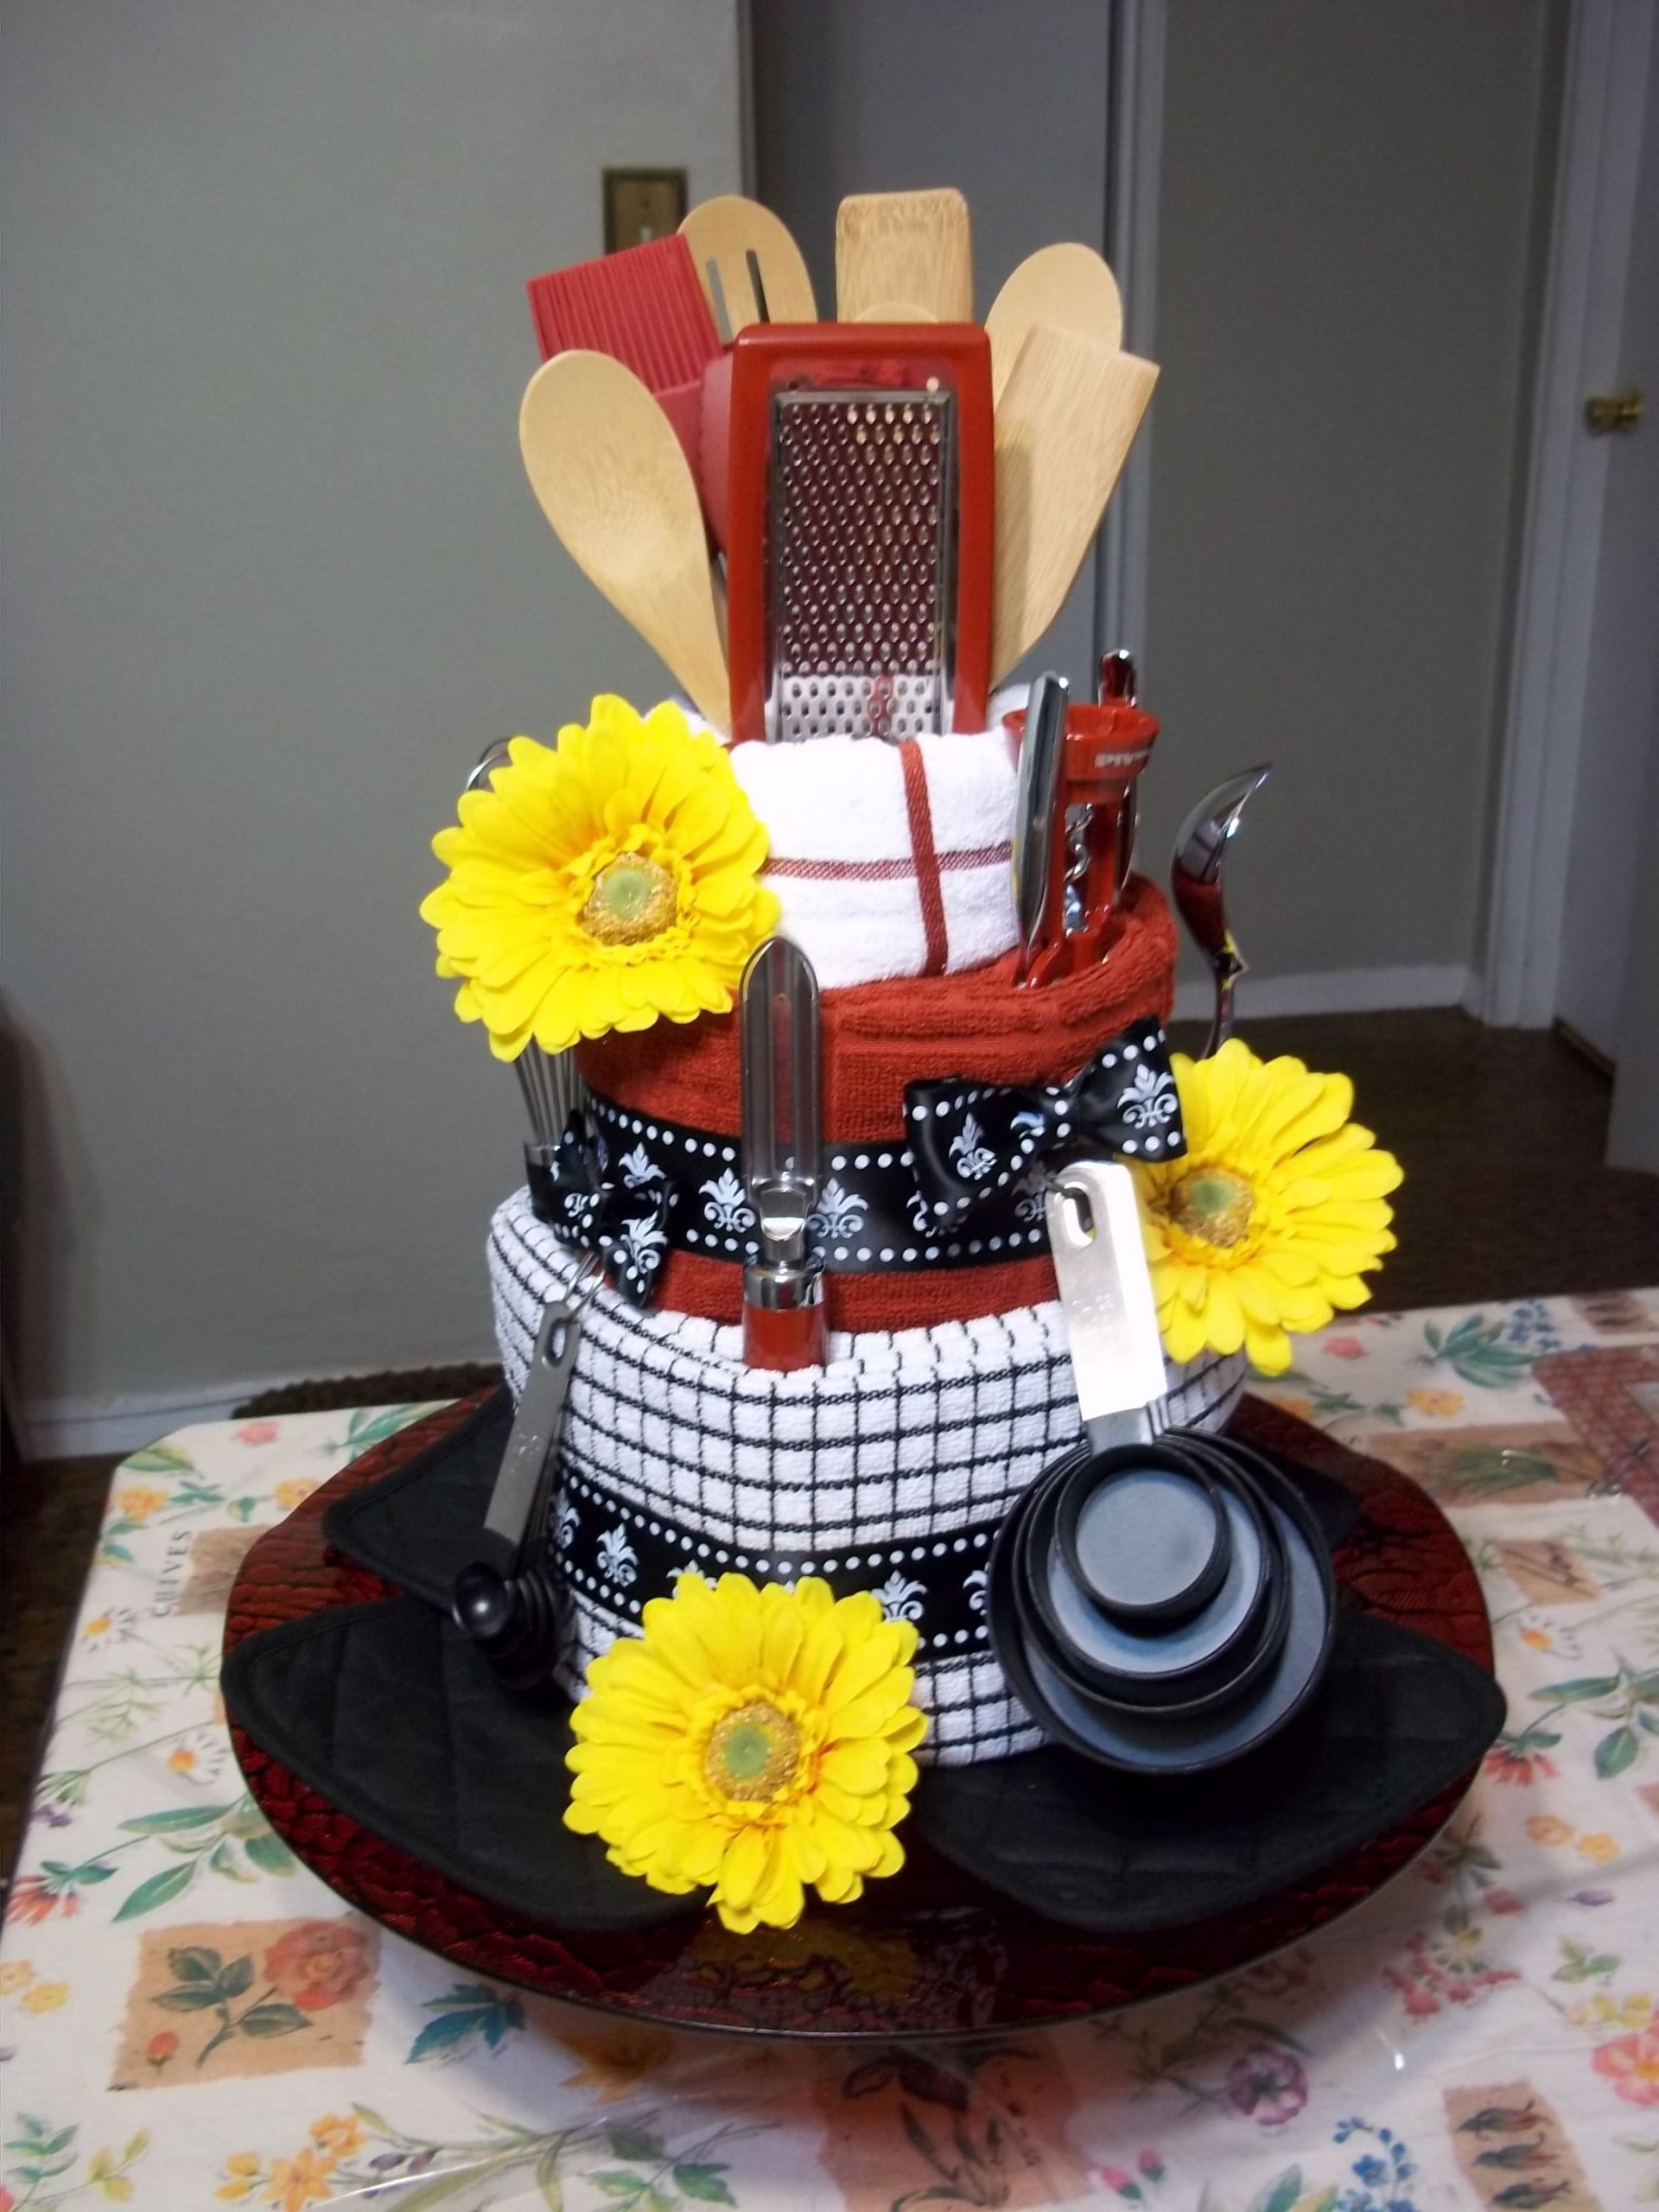 Wedding Gift Craft Ideas
 Dish Towel Cake I made for a Bridal Shower